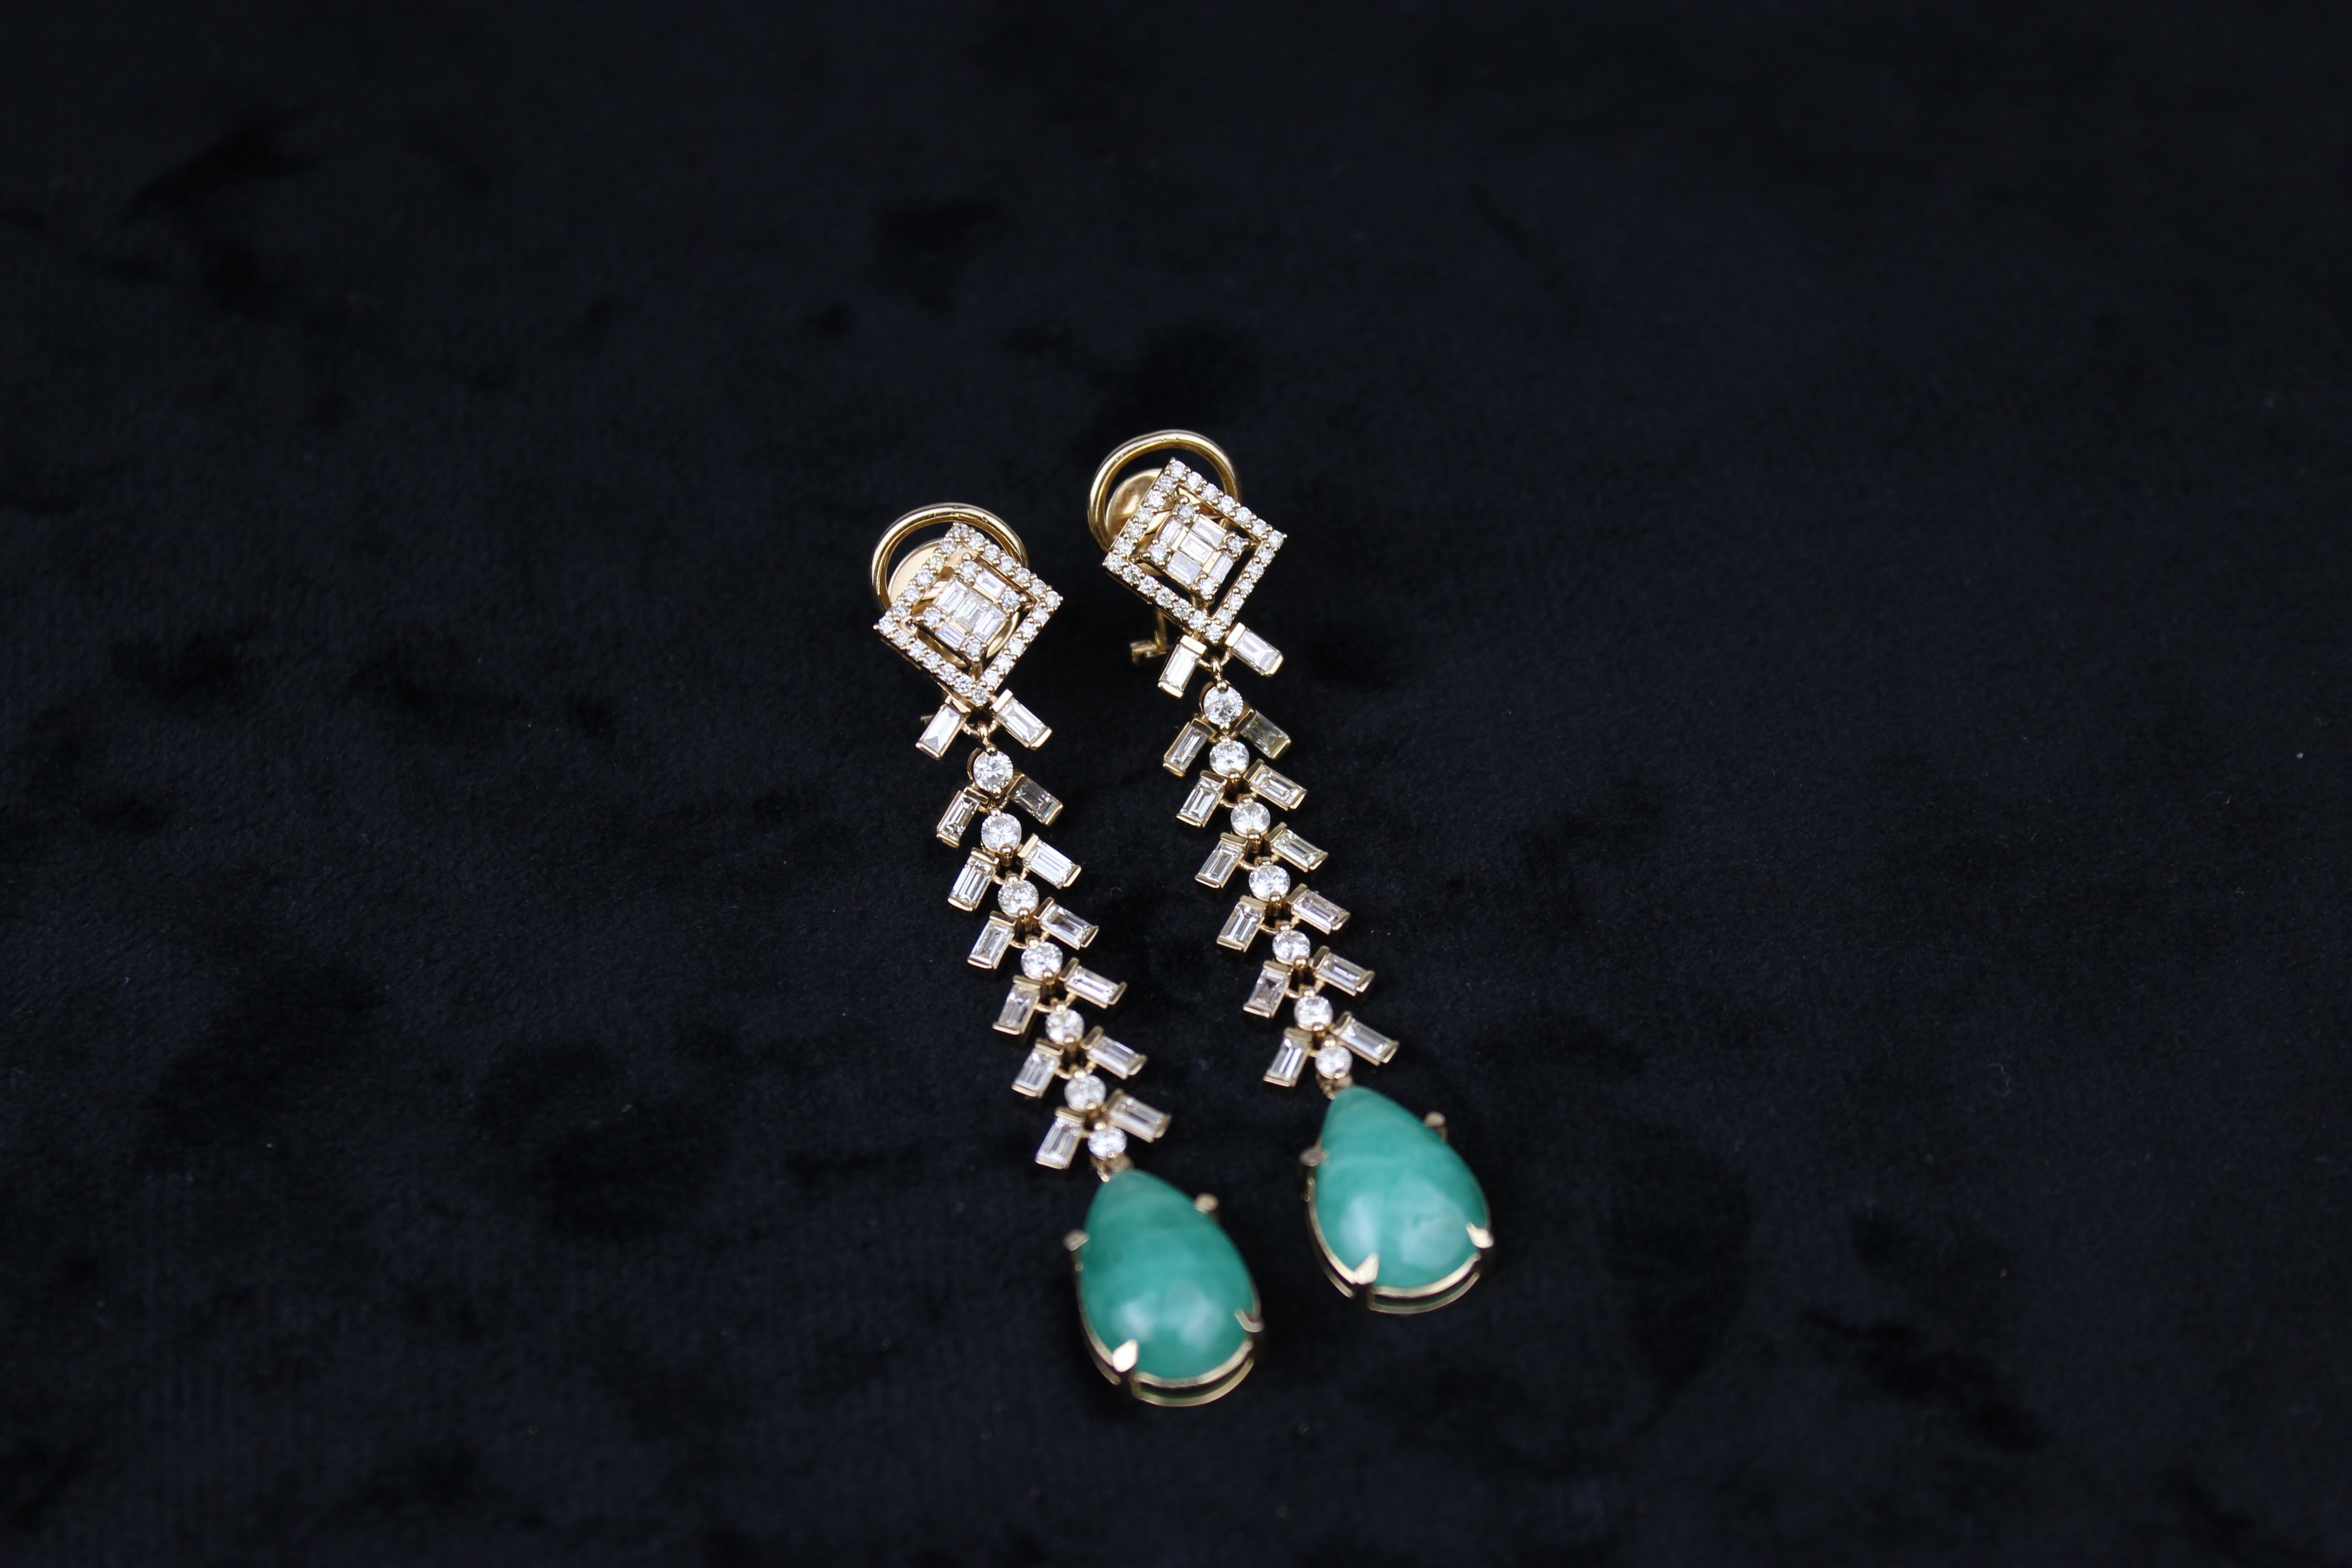 Tear Drop Emerald Gemstone and Diamond Earrings in 18k Solid Gold In New Condition For Sale In New Delhi, DL